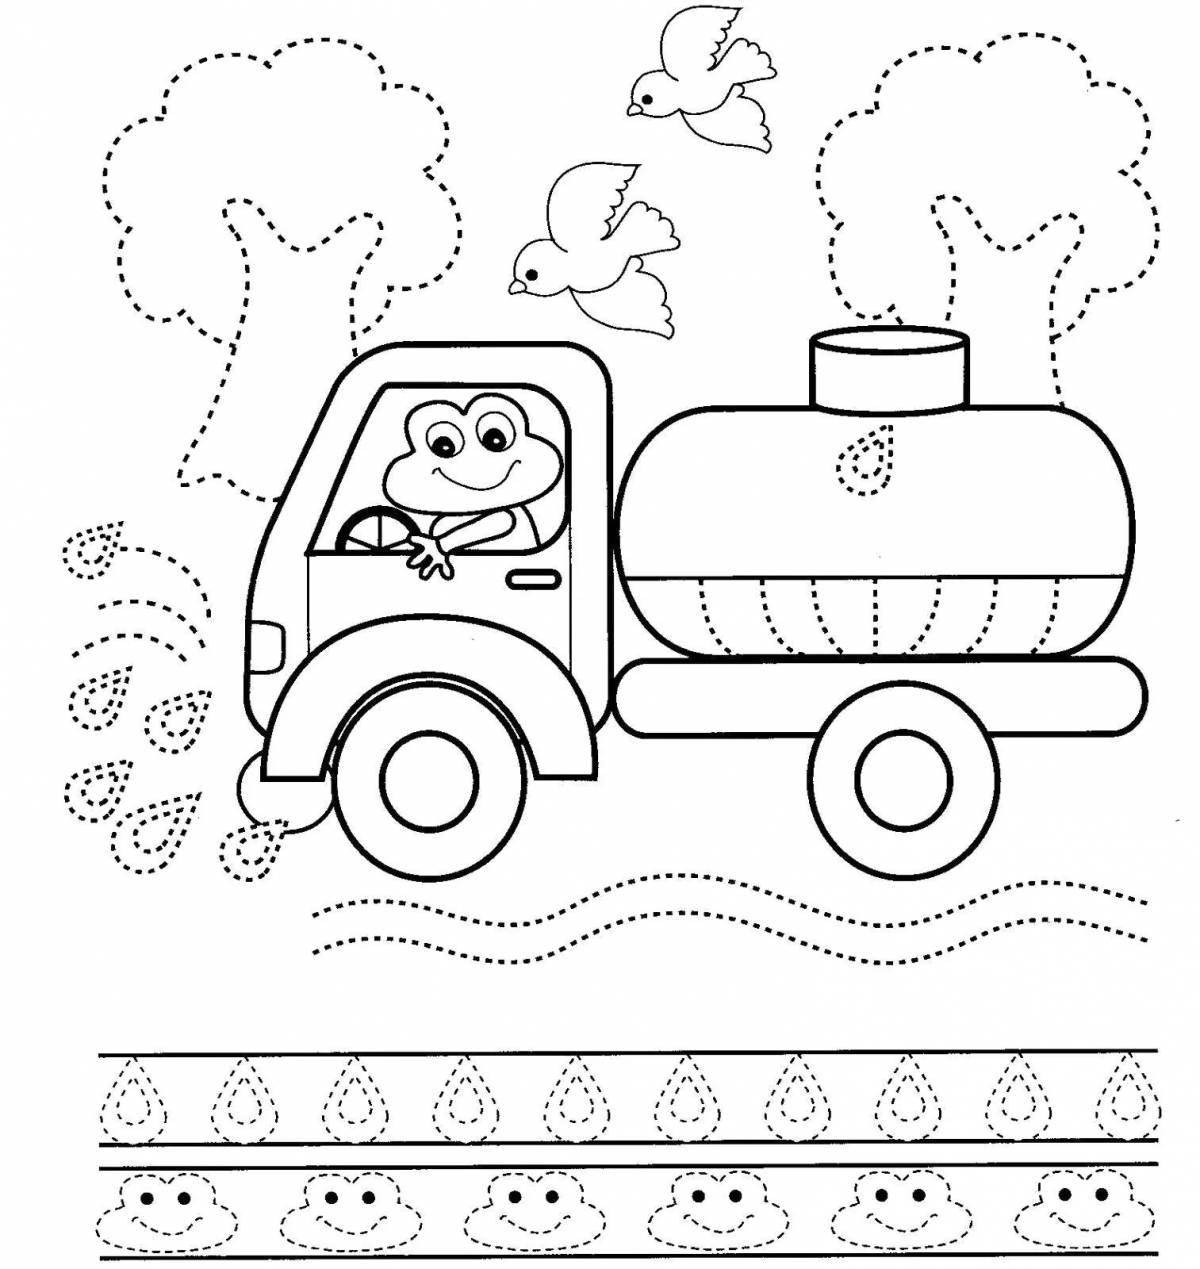 Fun coloring book for 4 year olds